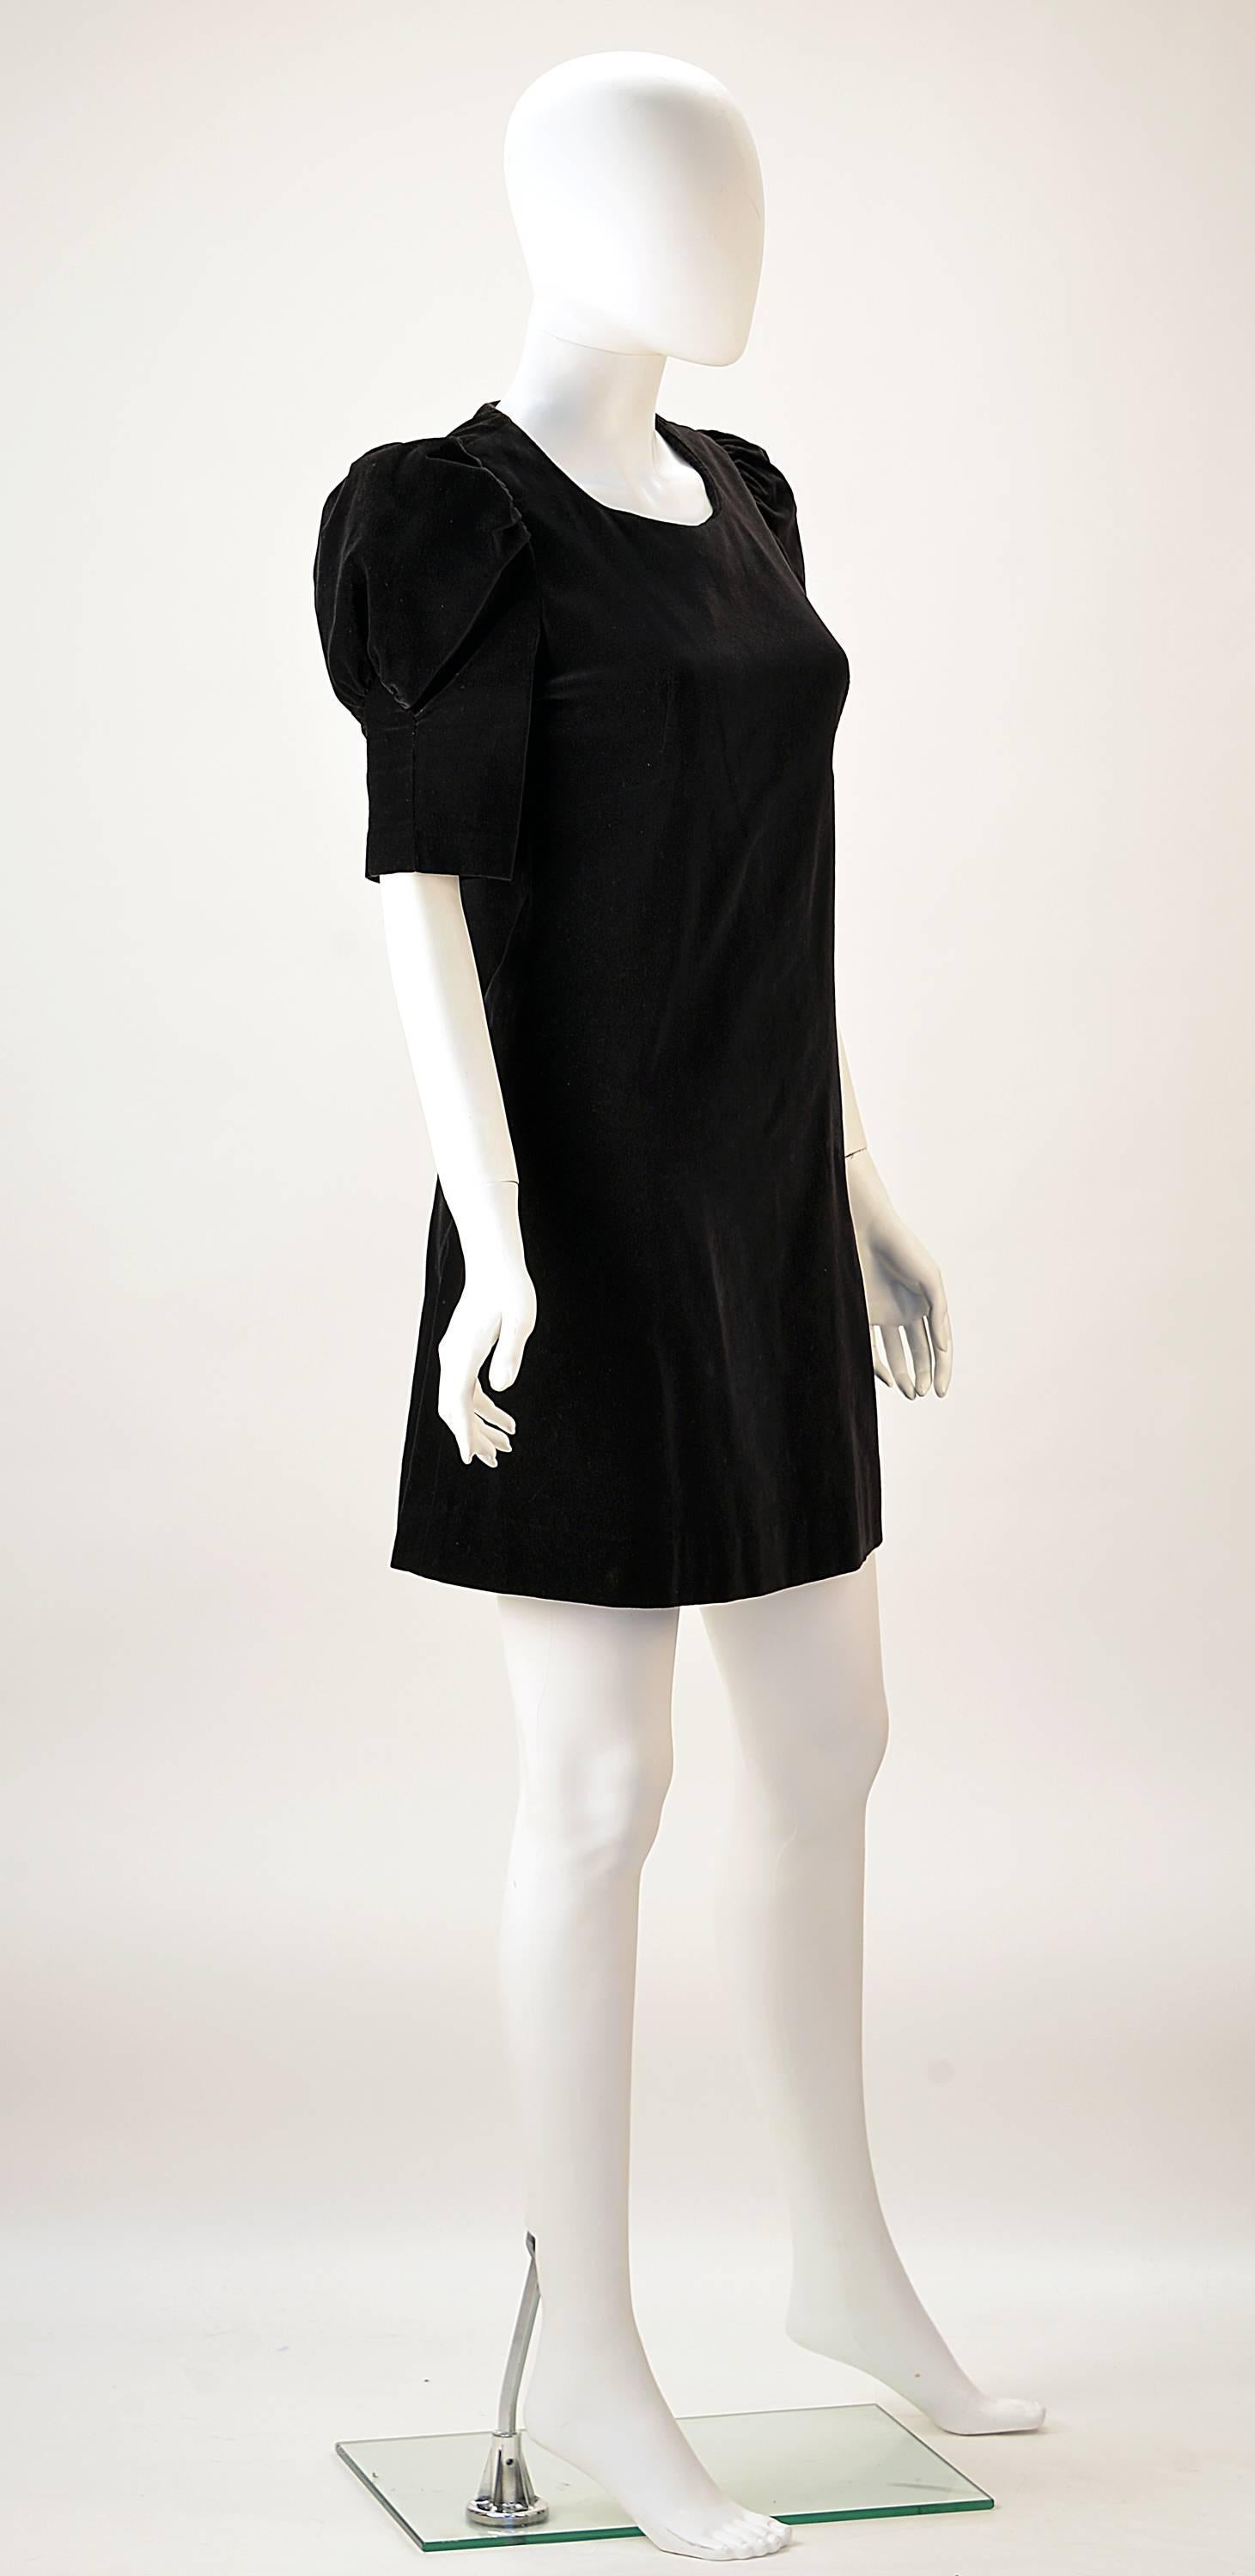 Simply adorable and classic!  This "60's London street wear goes to a Formal" dress, designed Barbara Hulanicki of Biba is made of beautiful black velvet. Perfect for your New Year's Party in any city!  

Mrs. Couture can picture it